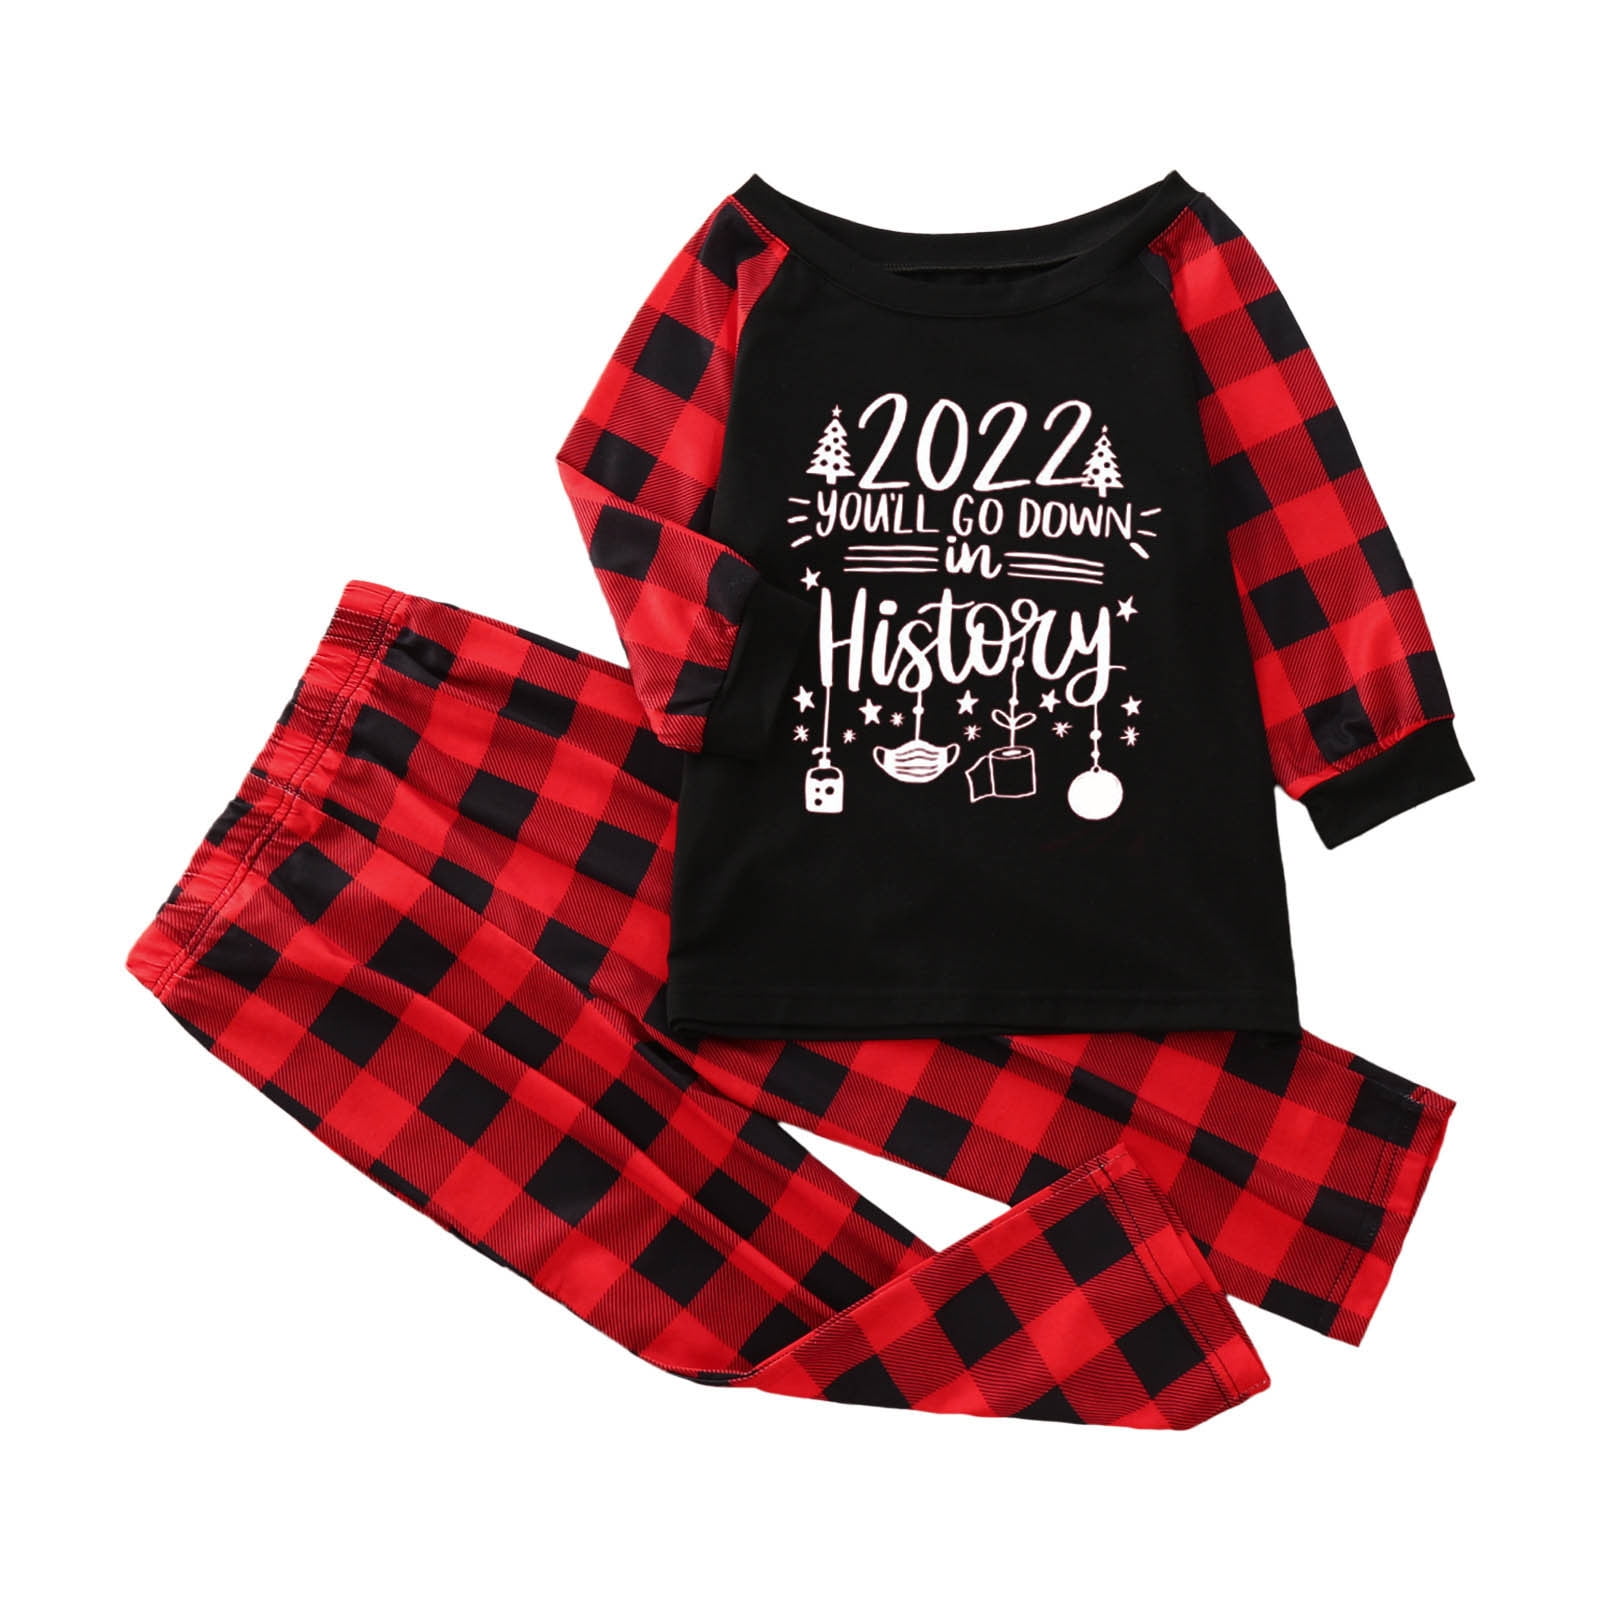 Family Christmas Pjs Matching Sets Cute Print Top and Plaid Pants Outfits Wear Home 2022 Happy New Years Pajamas Set